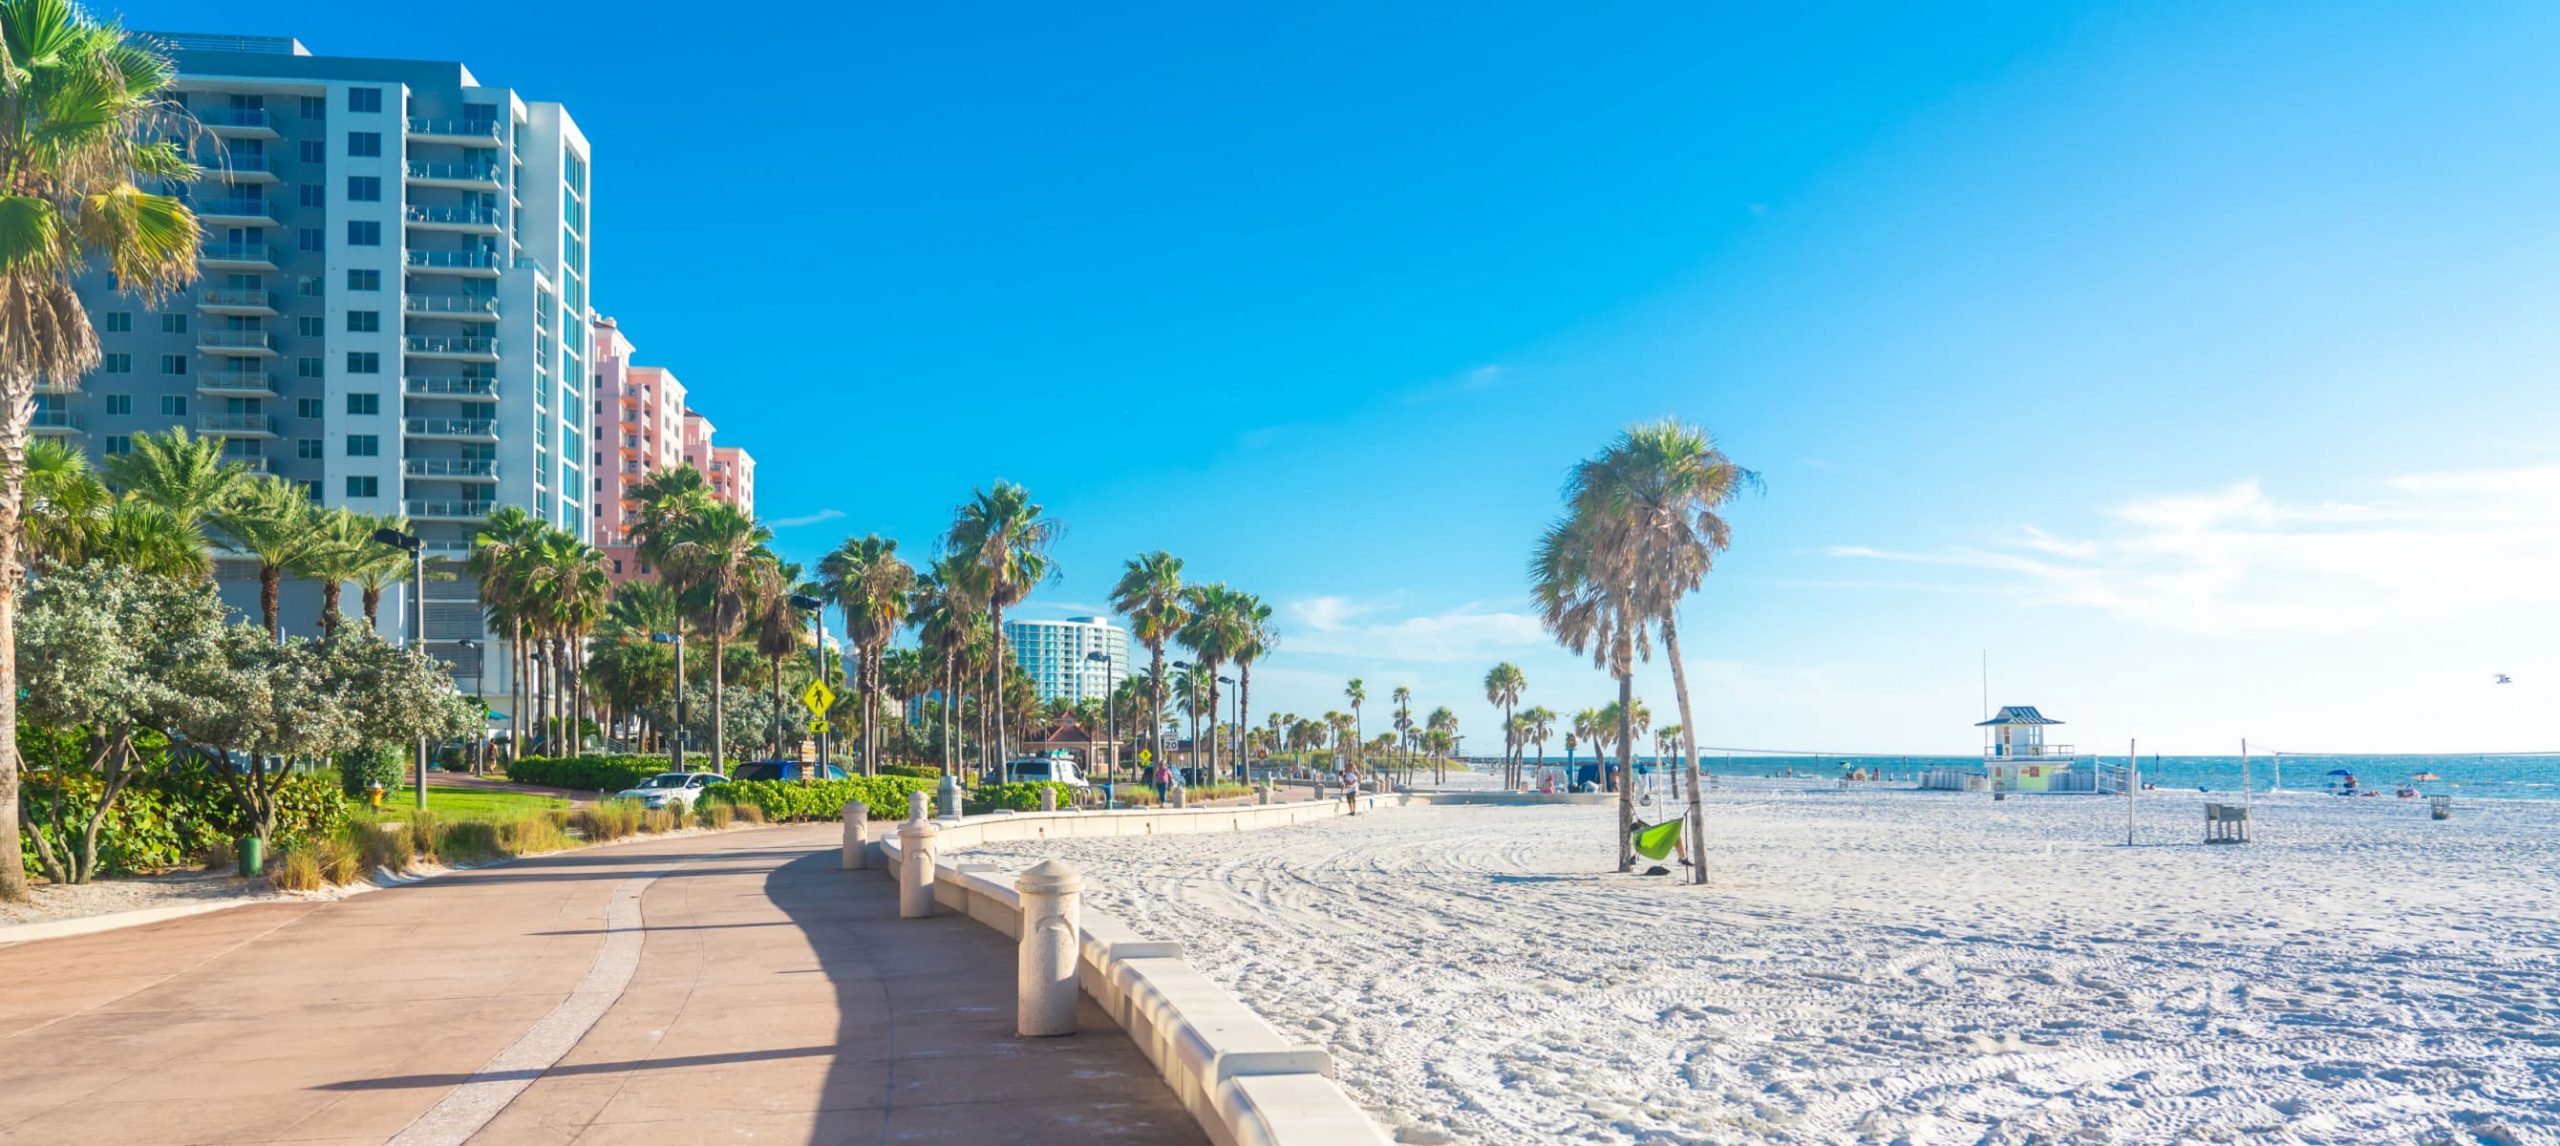 8 Most Amazing Things To Do In Clearwater Beach, FL